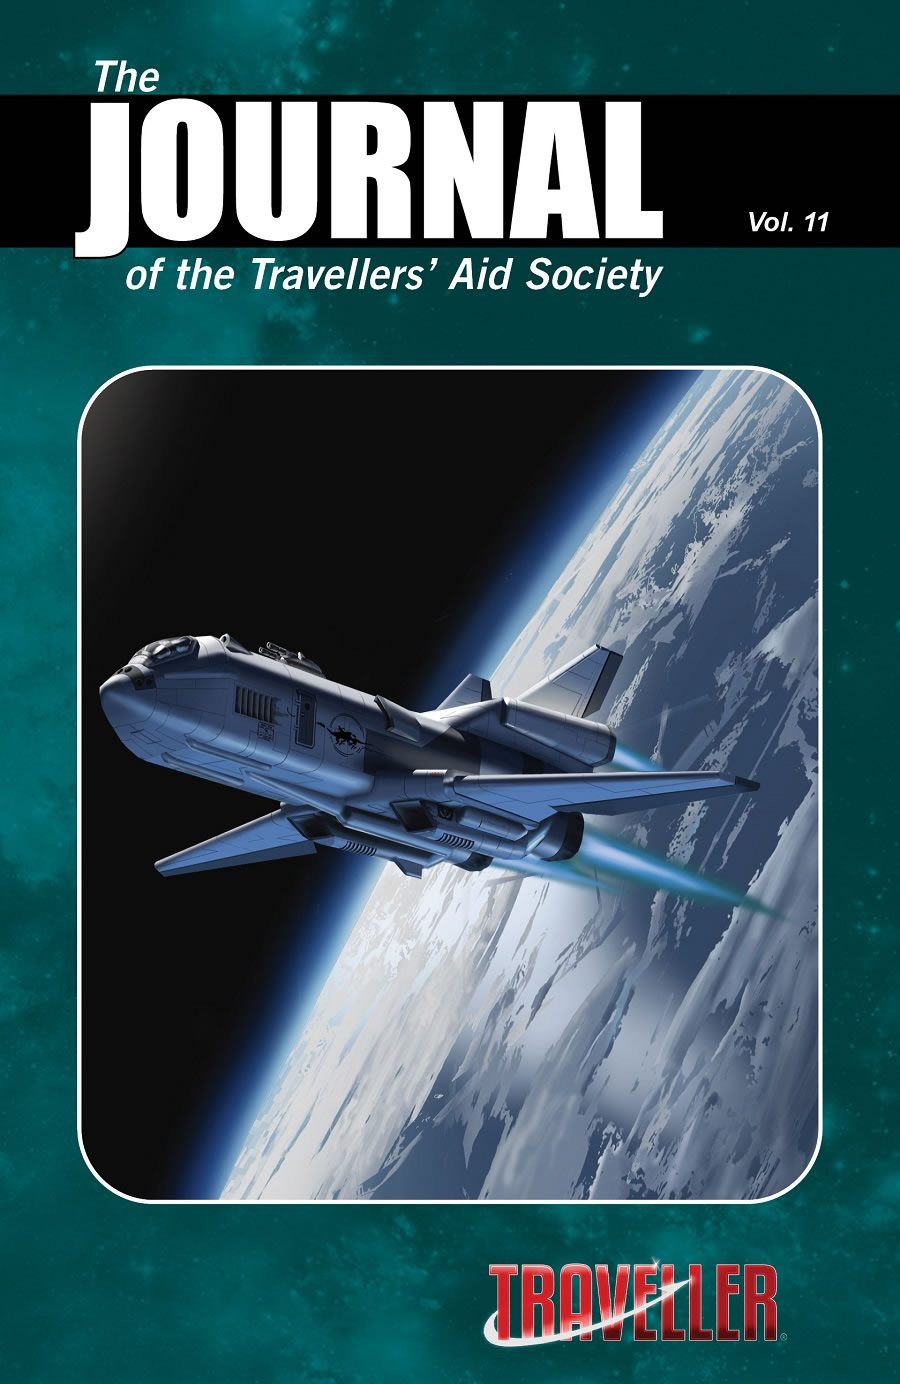 The Journal of Travellers Aid Society Vol.11 